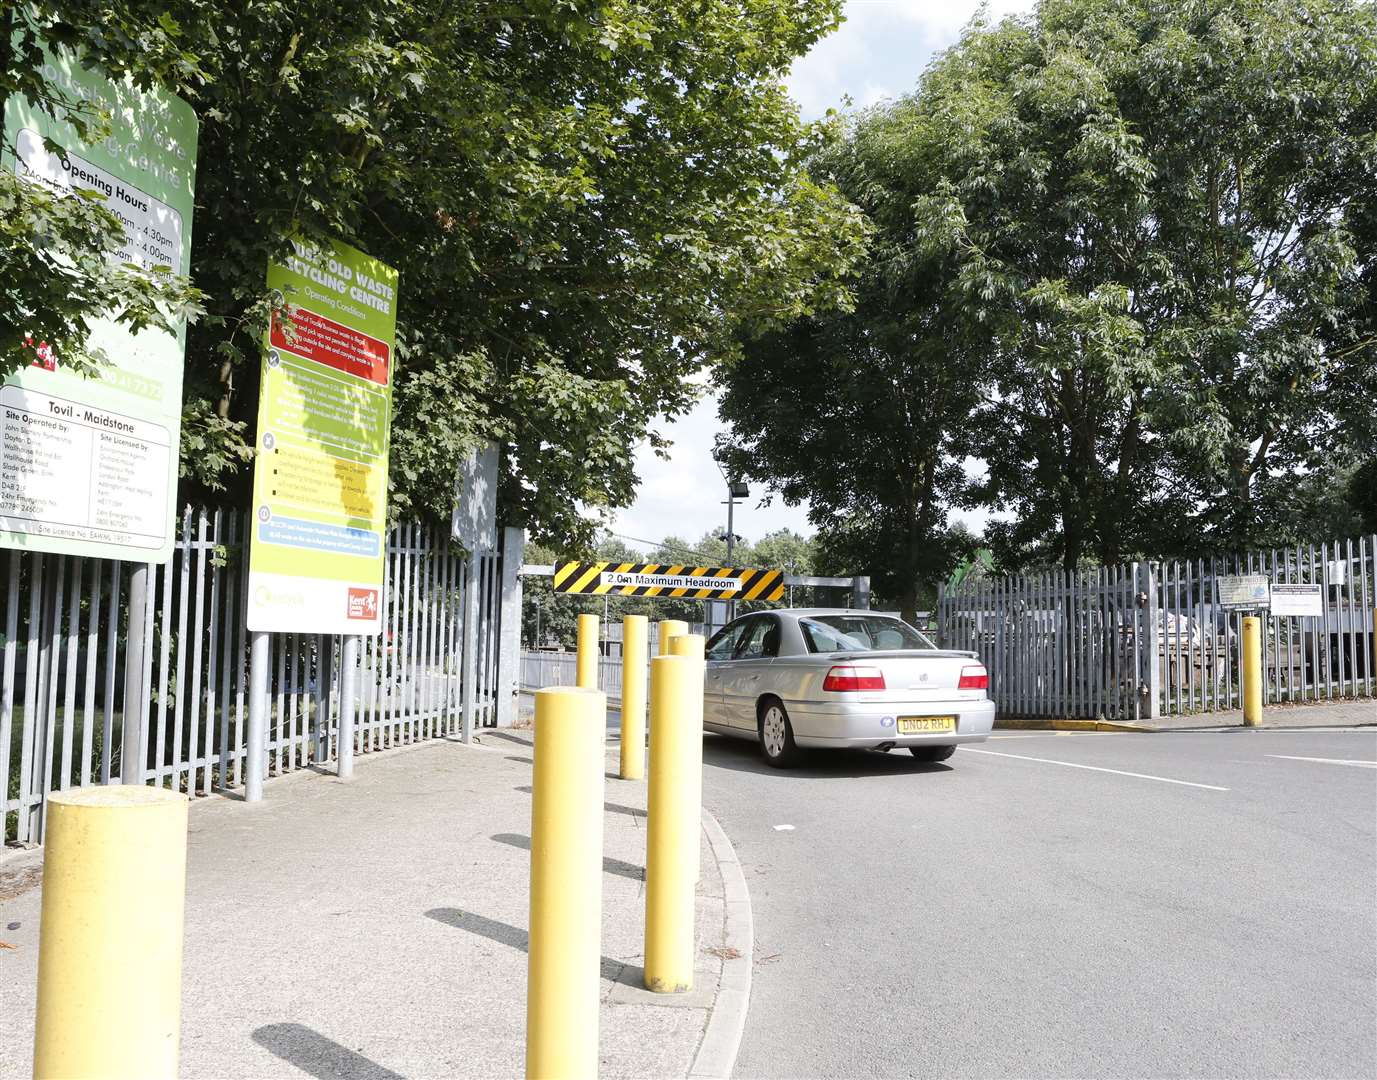 The Tovil Recycling Centre in Burial Ground Lane was among those earmarked for potential closure.